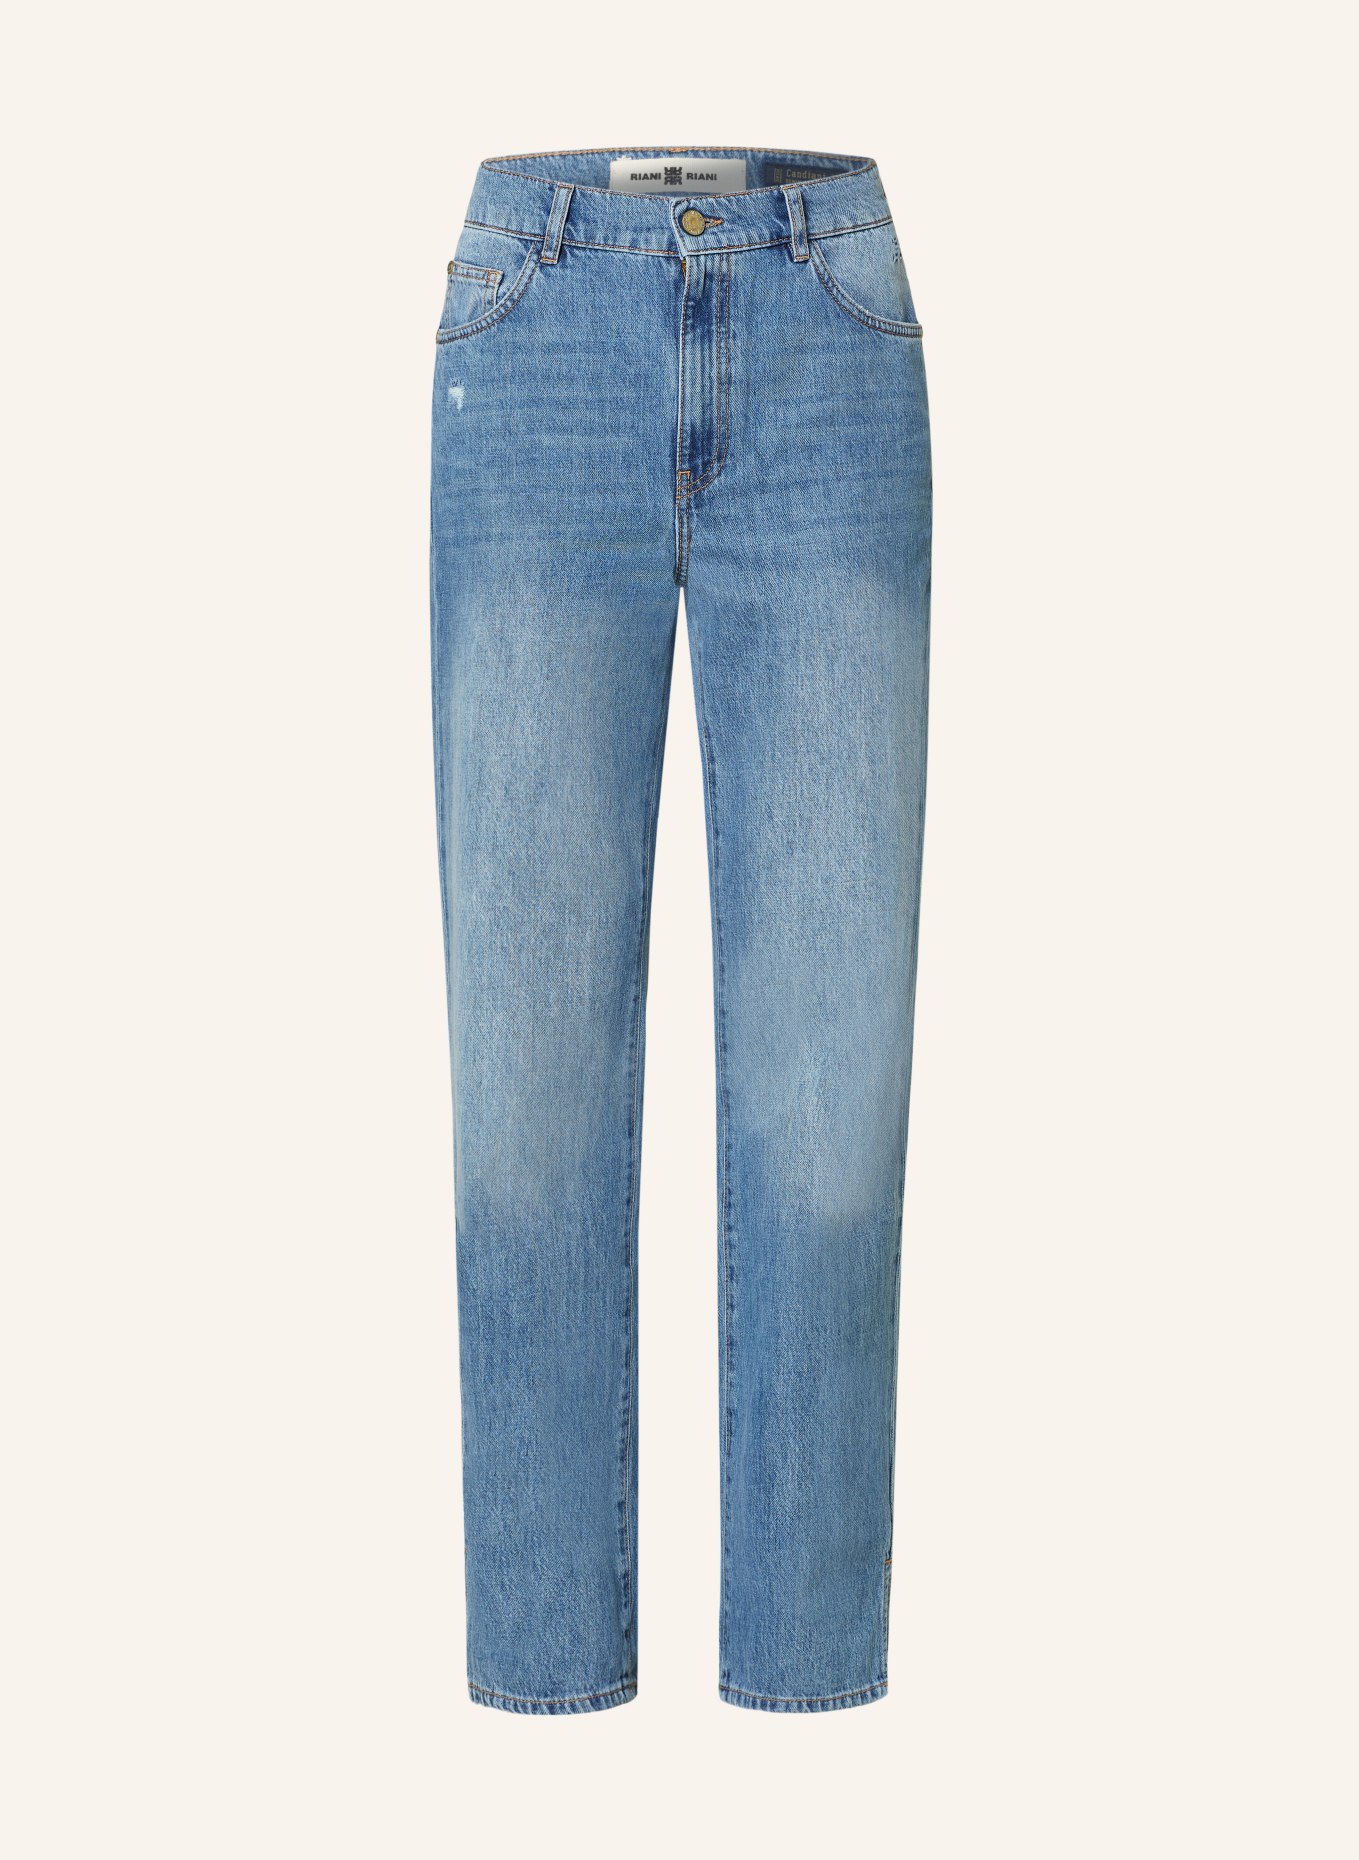 RIANI Straight Jeans, Farbe: 410 bleached blue scratched (Bild 1)